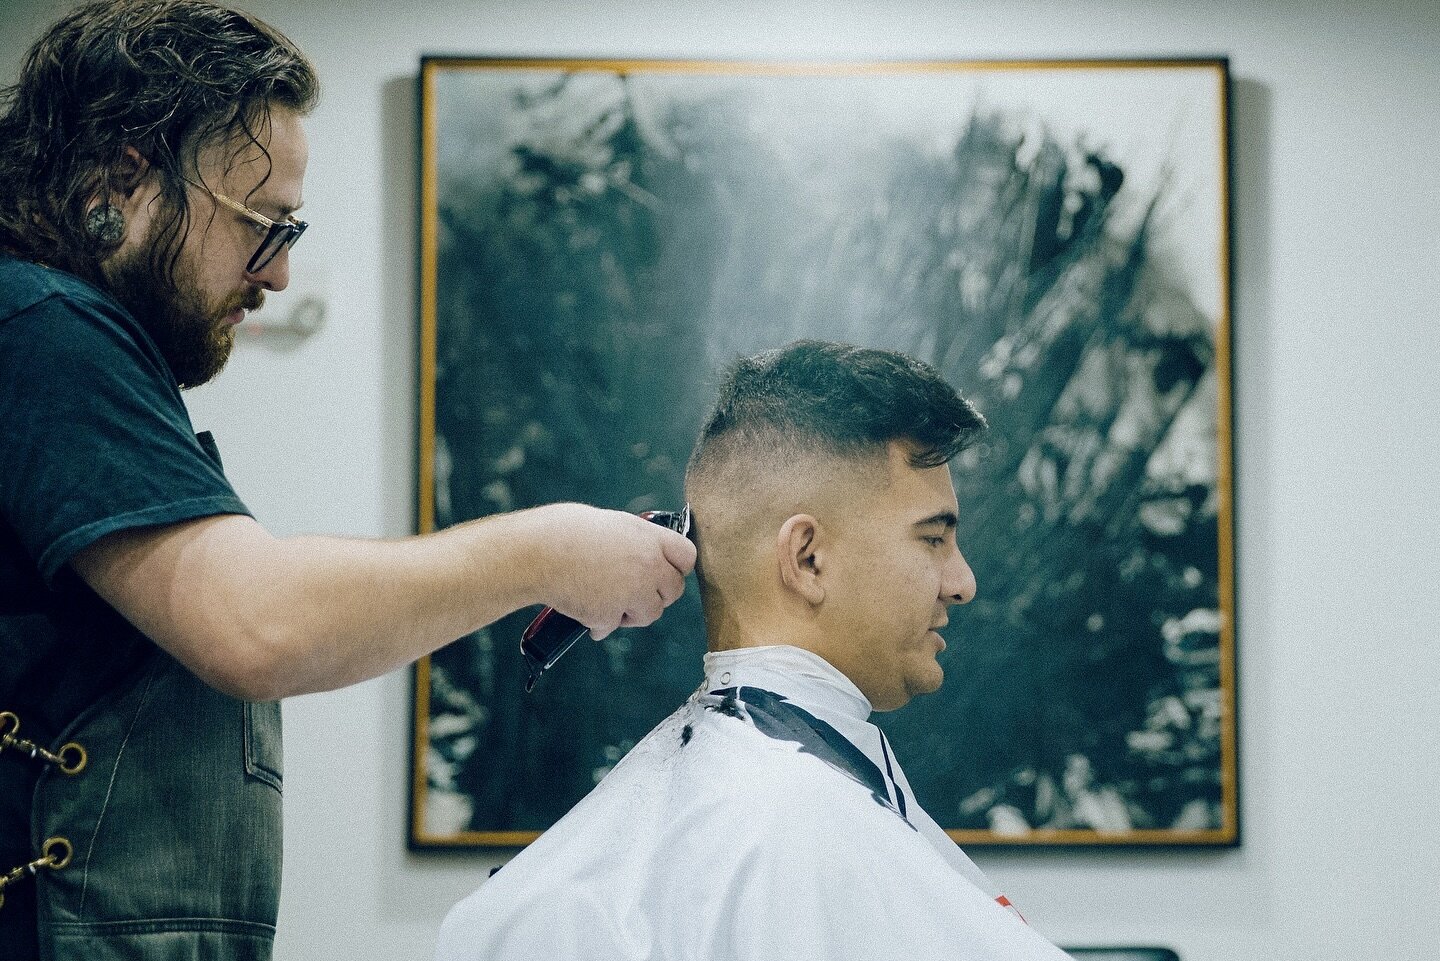 💈We&rsquo;re called Barber because &ldquo;Miracle Worker&rdquo; isn&rsquo;t an official title 😉
-
-
-
#theblockhousefranklin #barbershop #tnbarber #nashvillebarber #franklinfactory #workhard #franklintn #haircut #menshair #barber #barberlife #barbe